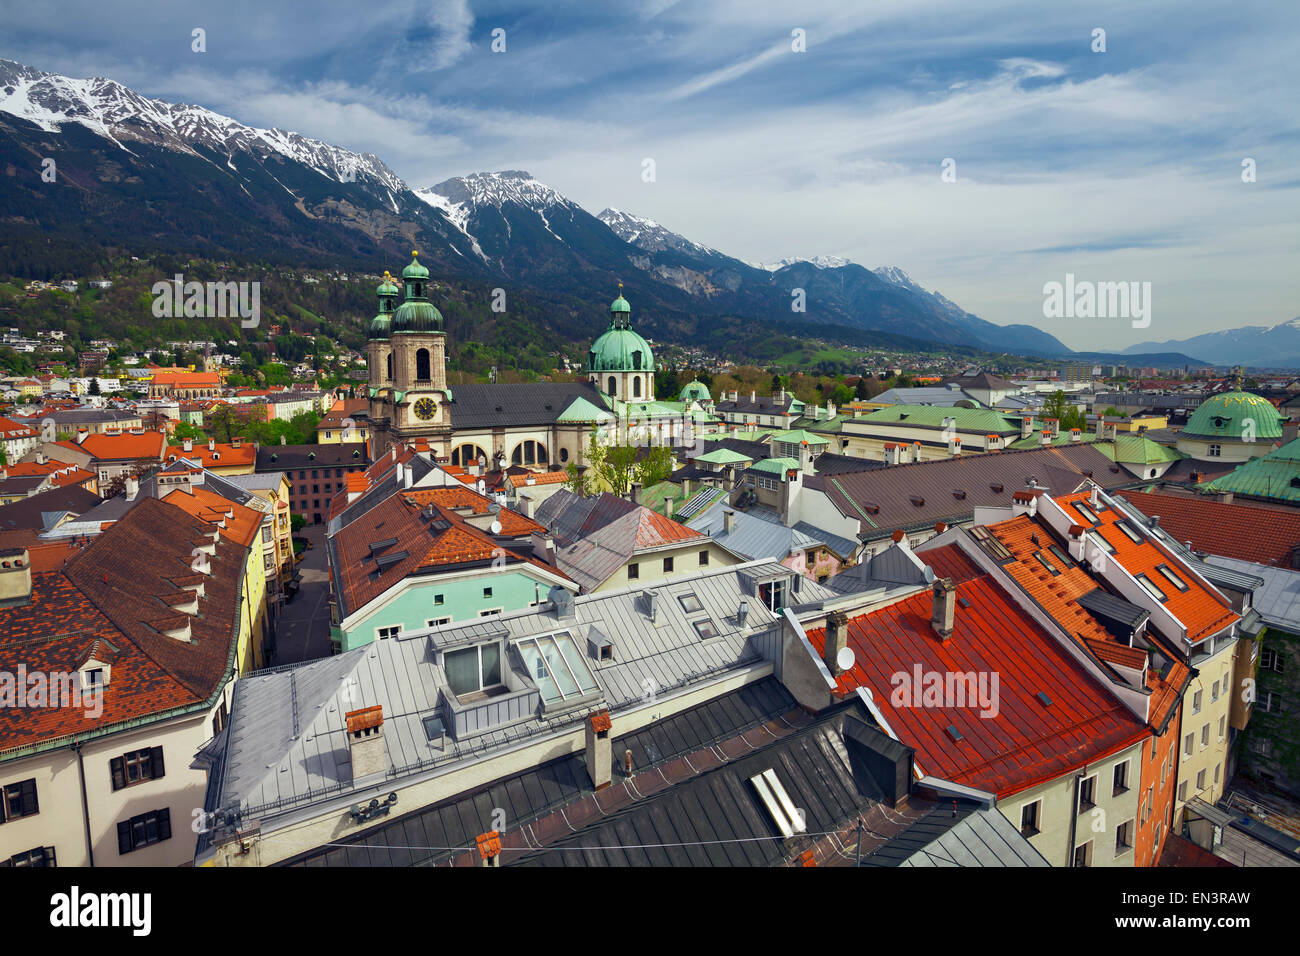 Innsbruck. Aerial view of Innsbruck from the Stadtturm, with the Innsbruck Cathedral (Cathedral of St. James ) and European Alps Stock Photo